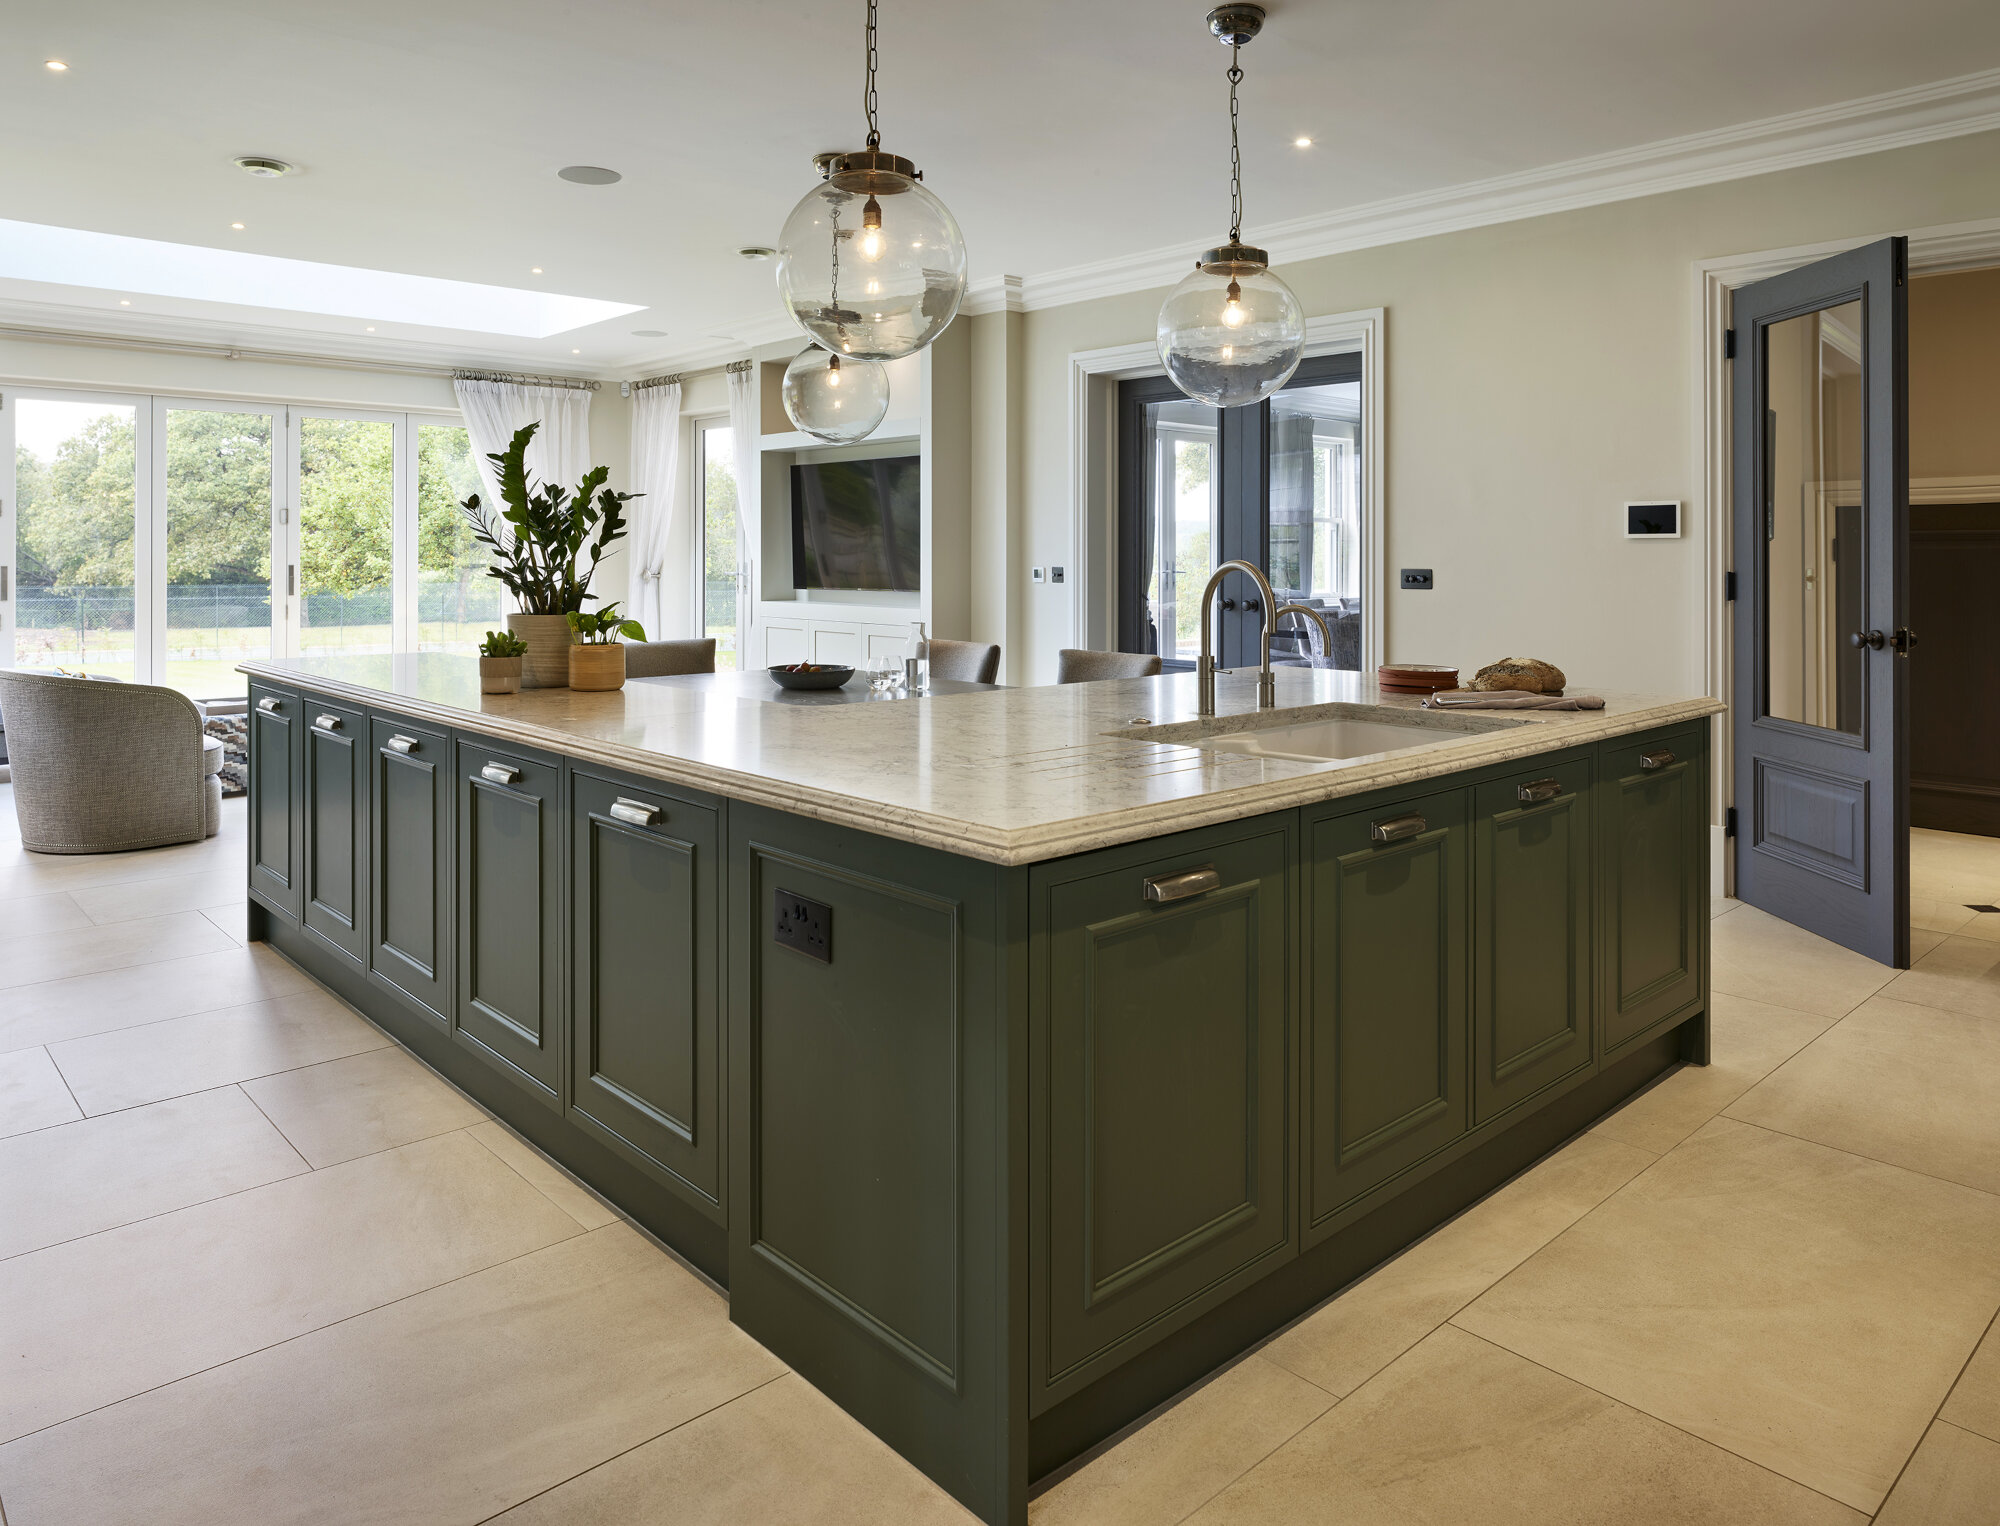 High End traditional Kitchens In Grantham